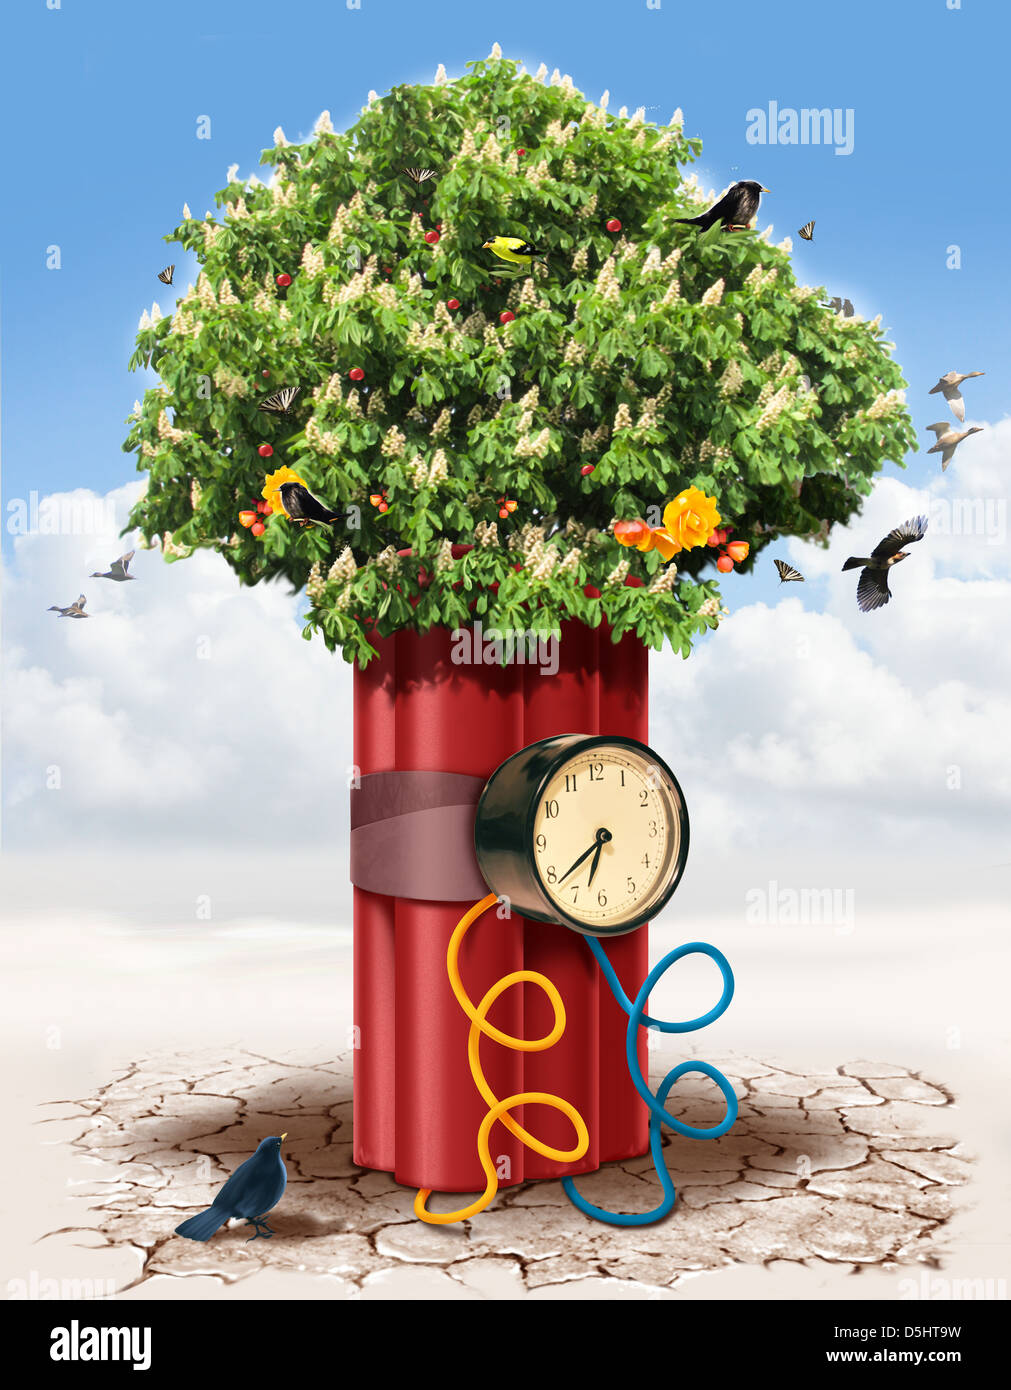 Illustrative image of tree wrapped with time bomb representing threat to nature Stock Photo